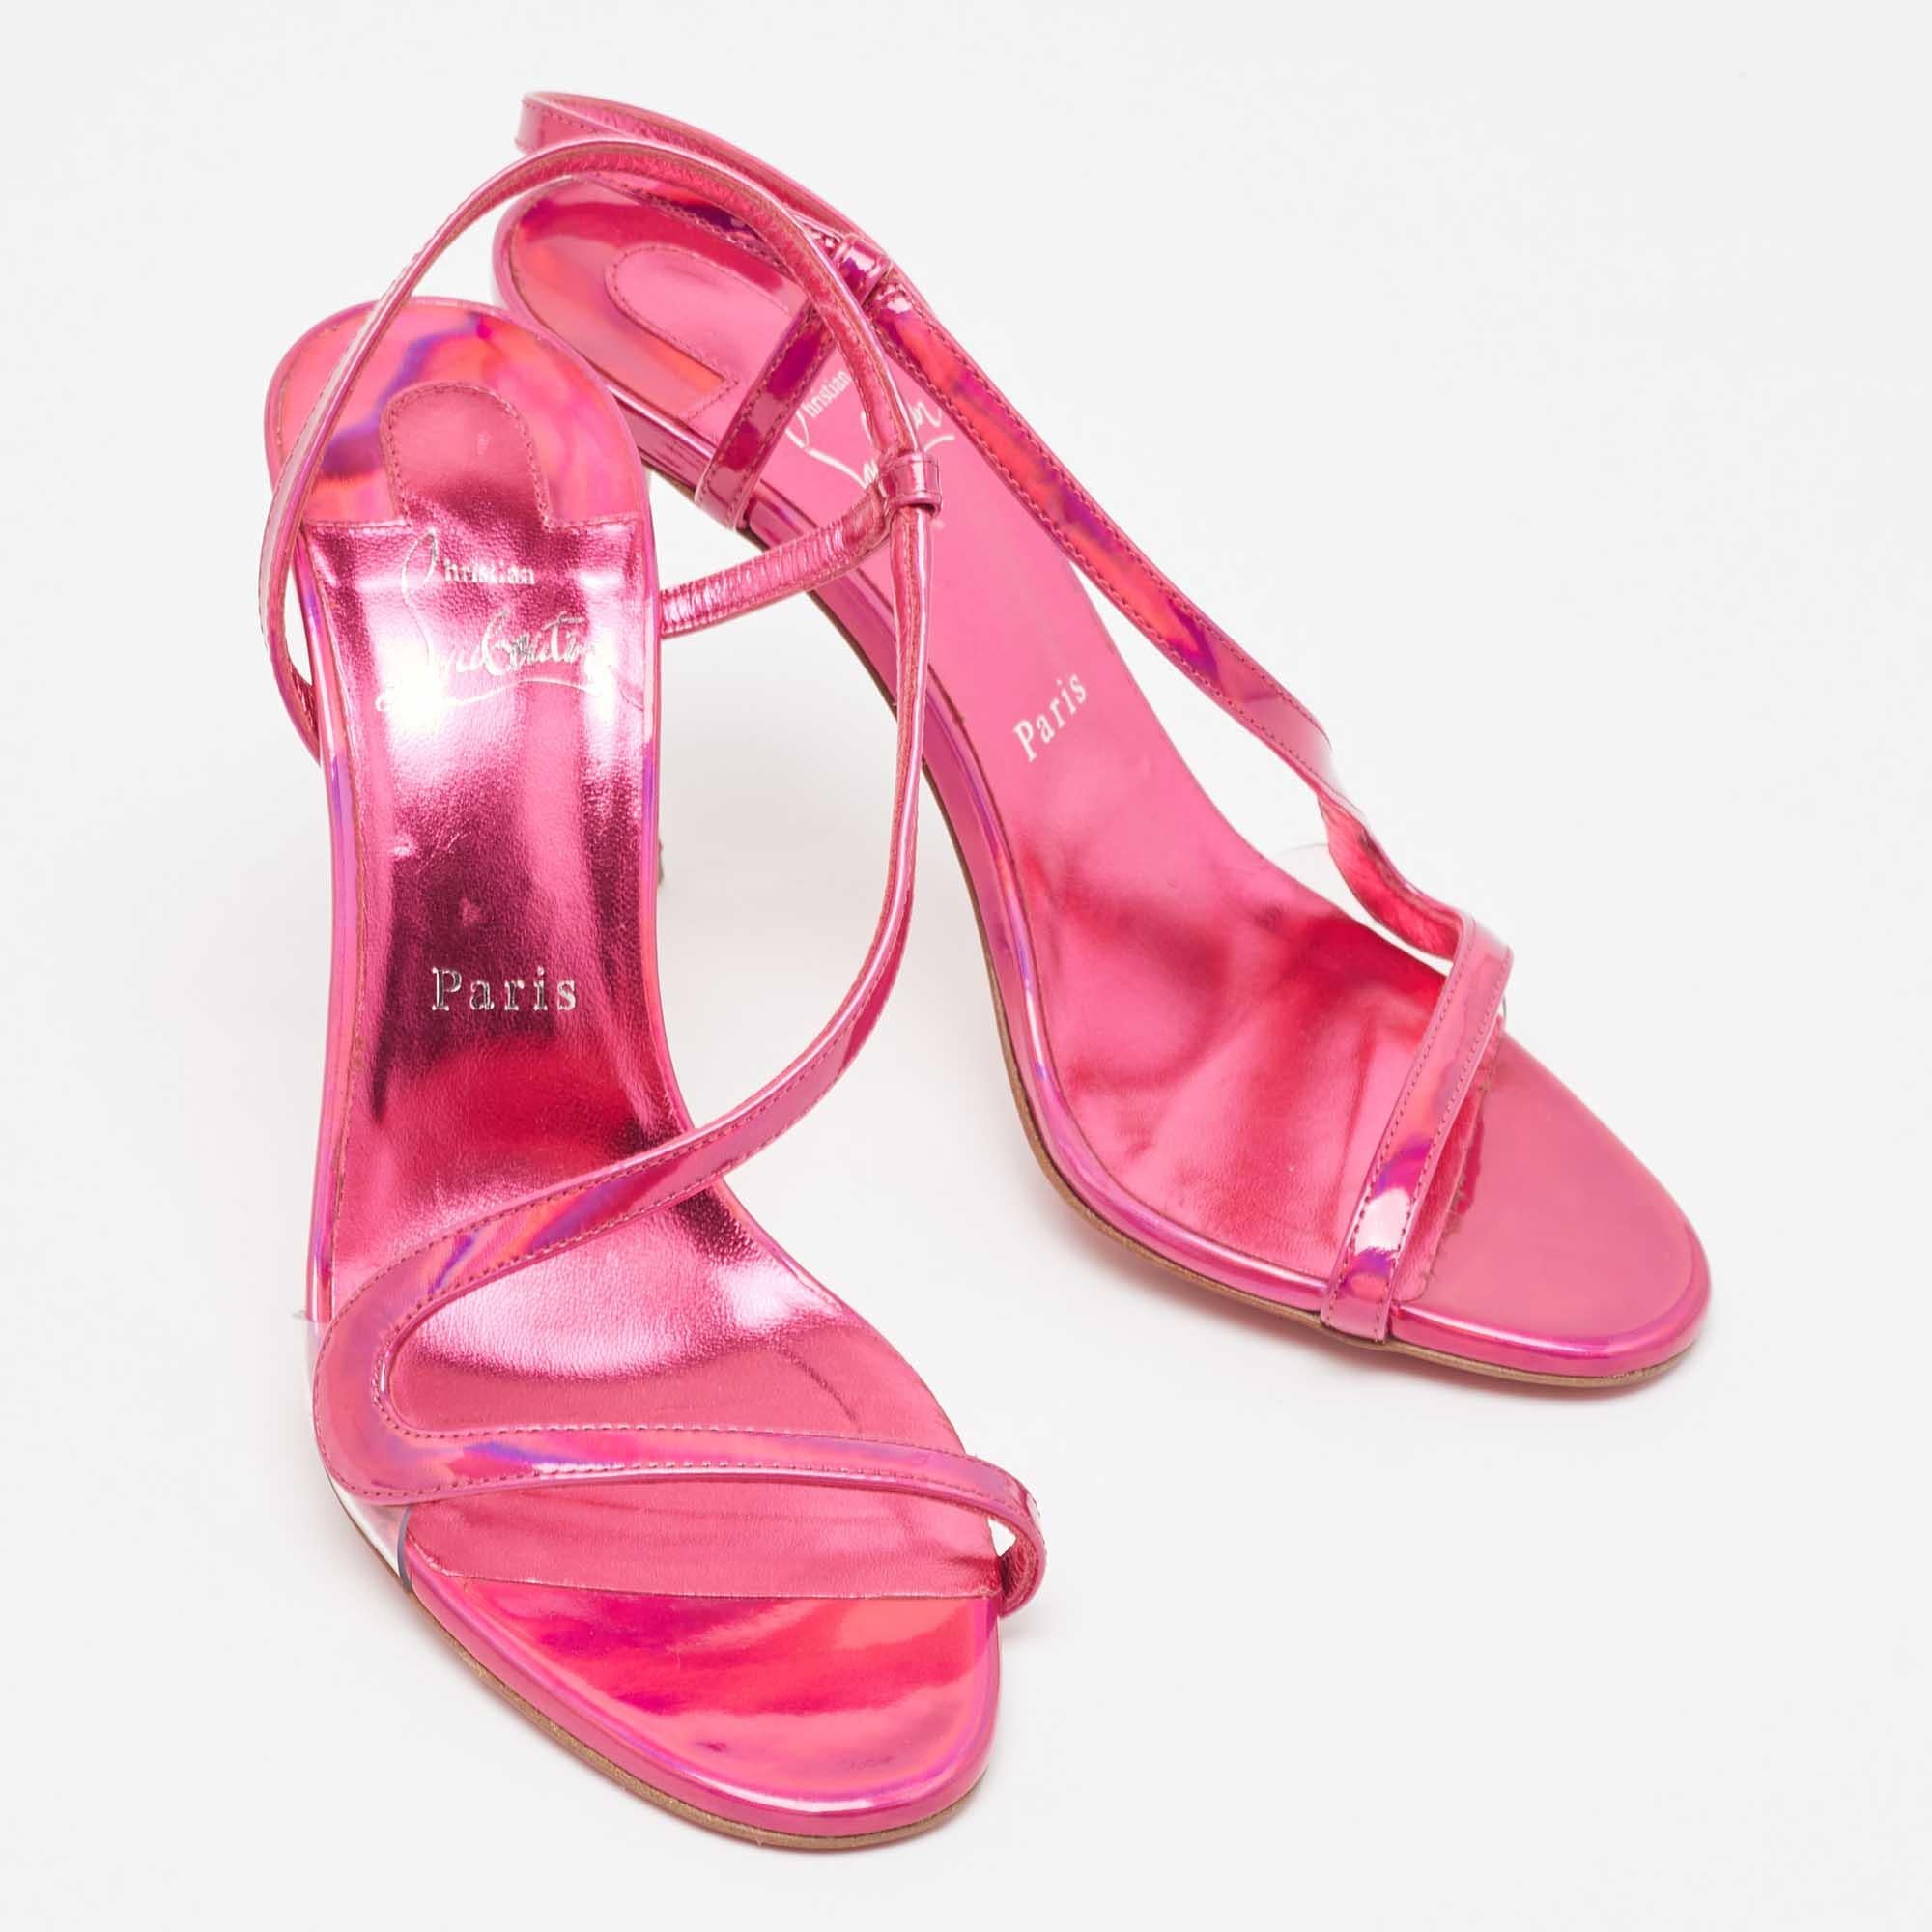 Christian Louboutin Pink Iridescent Leather Rosalie Sandals Size 38 In Good Condition For Sale In Dubai, Al Qouz 2